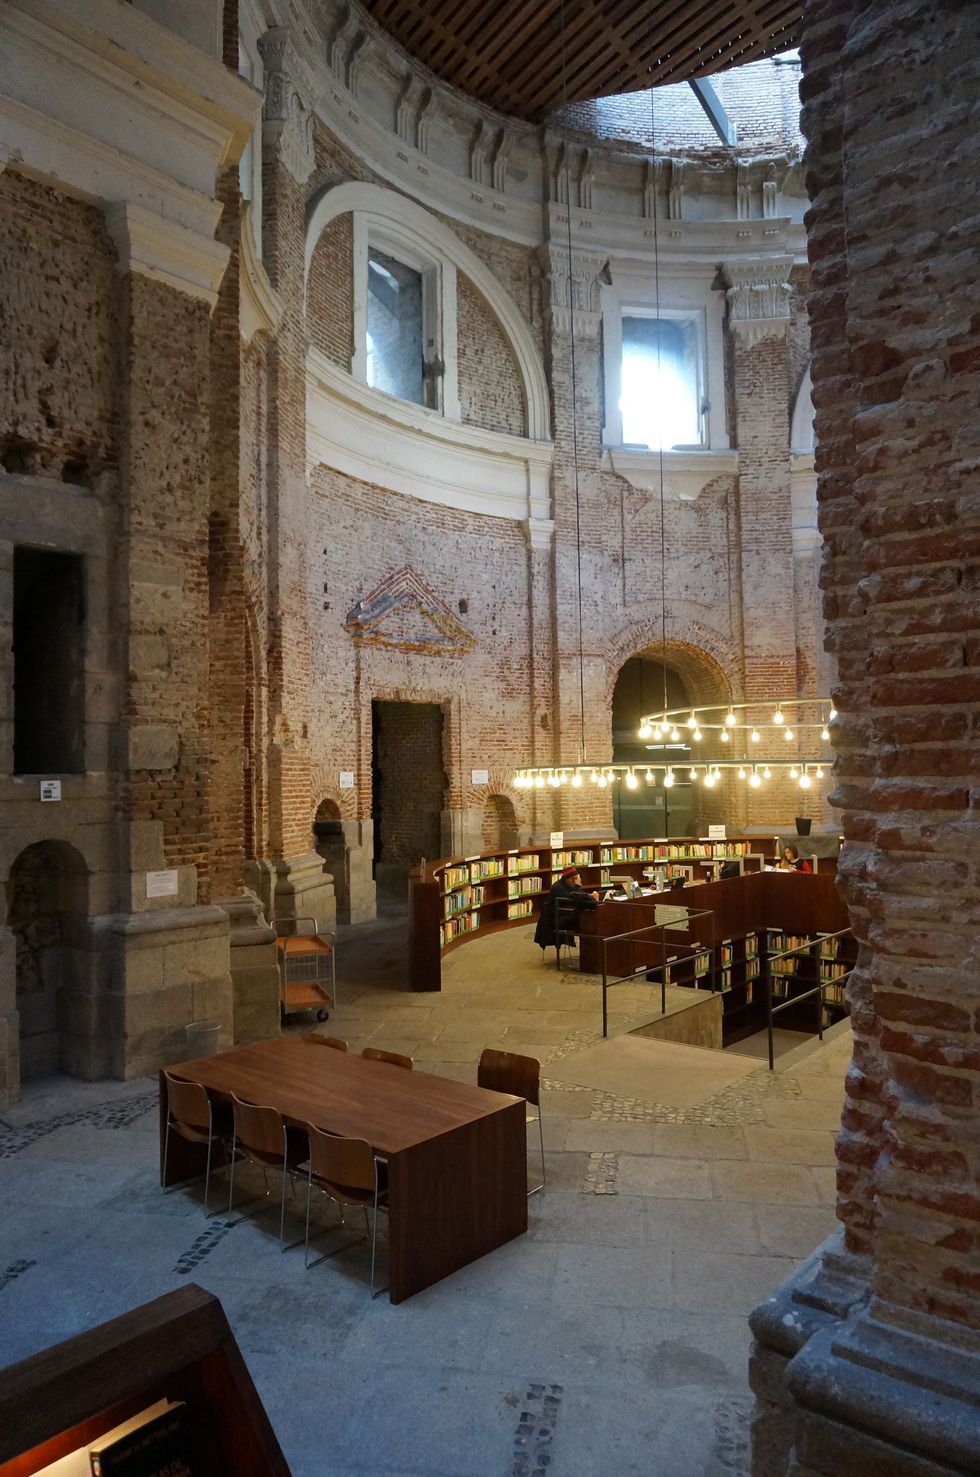 Building, Holy places, Architecture, Interior design, Arch, Room, Furniture, Church, 